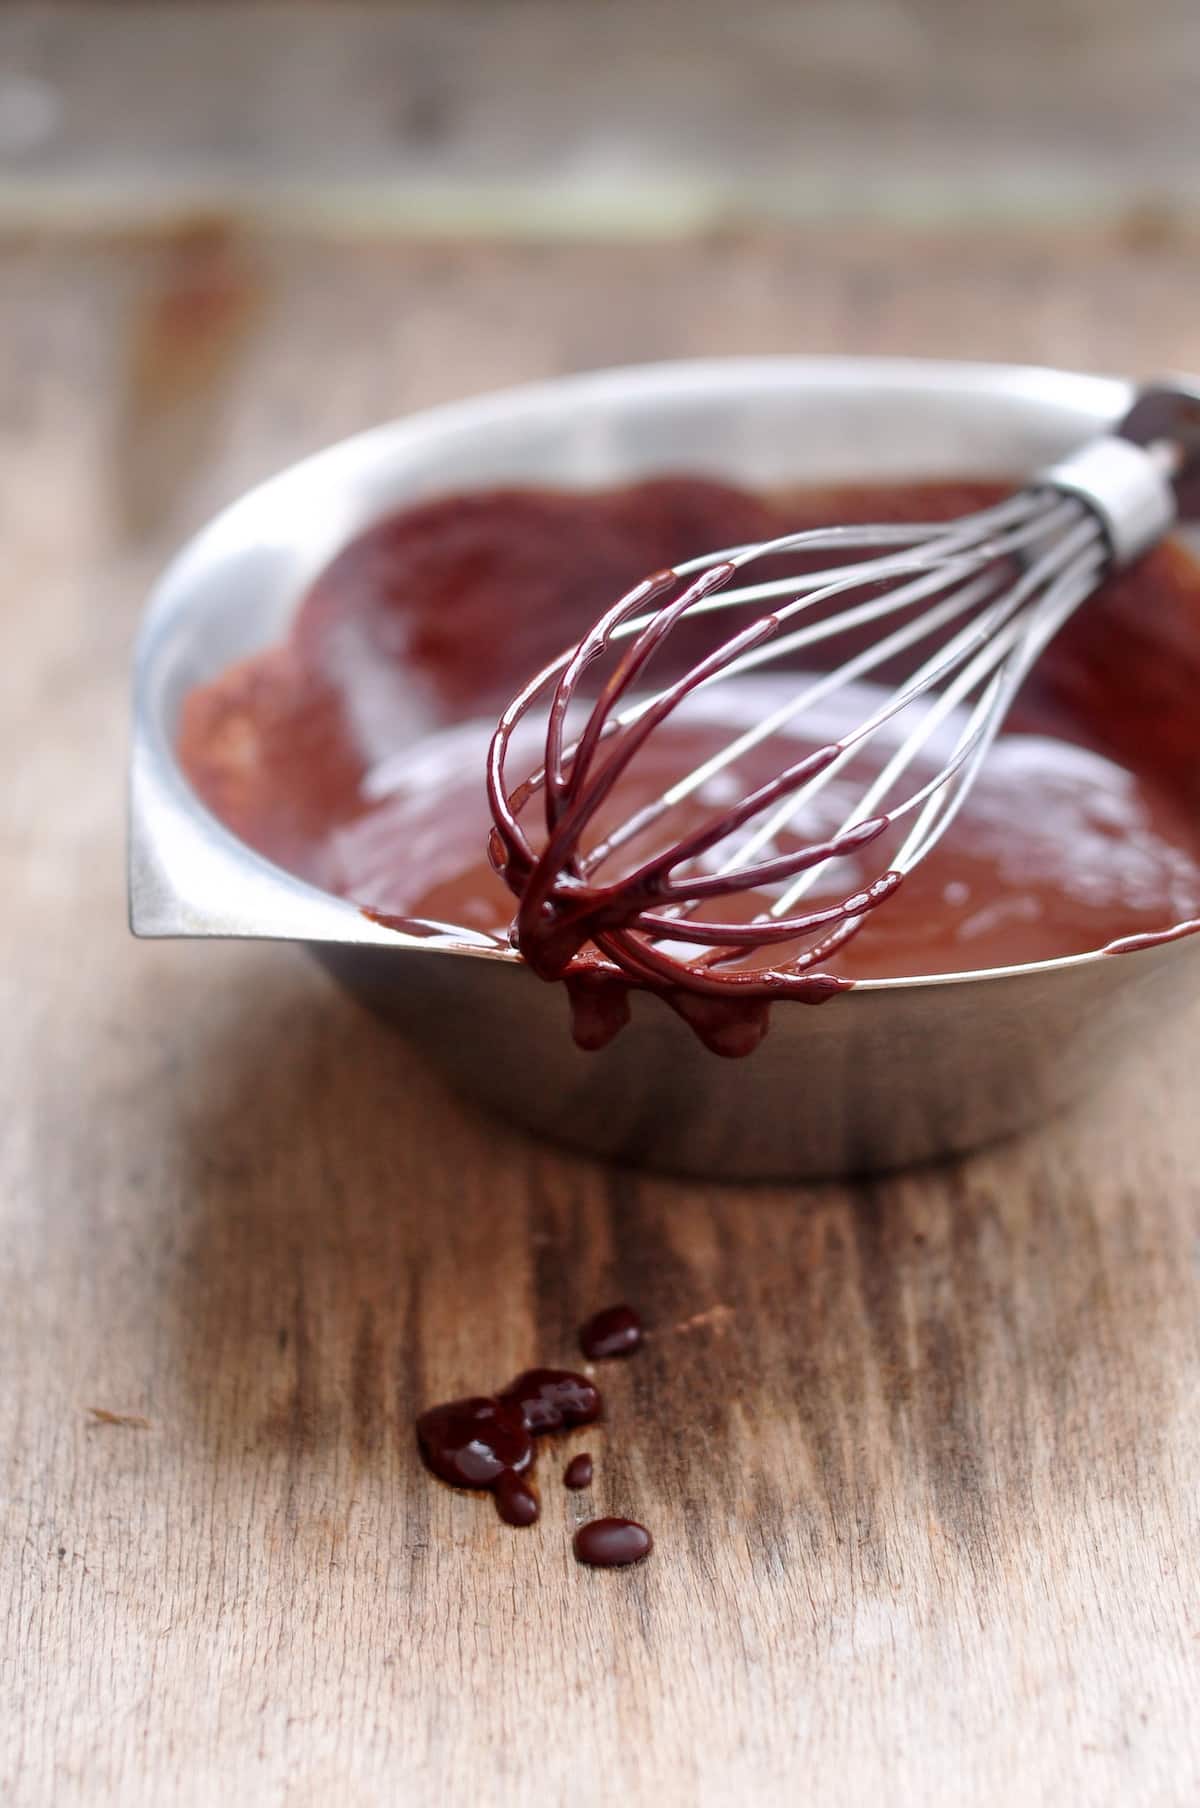 melted chocolate in stainless steel bowl with whisk.